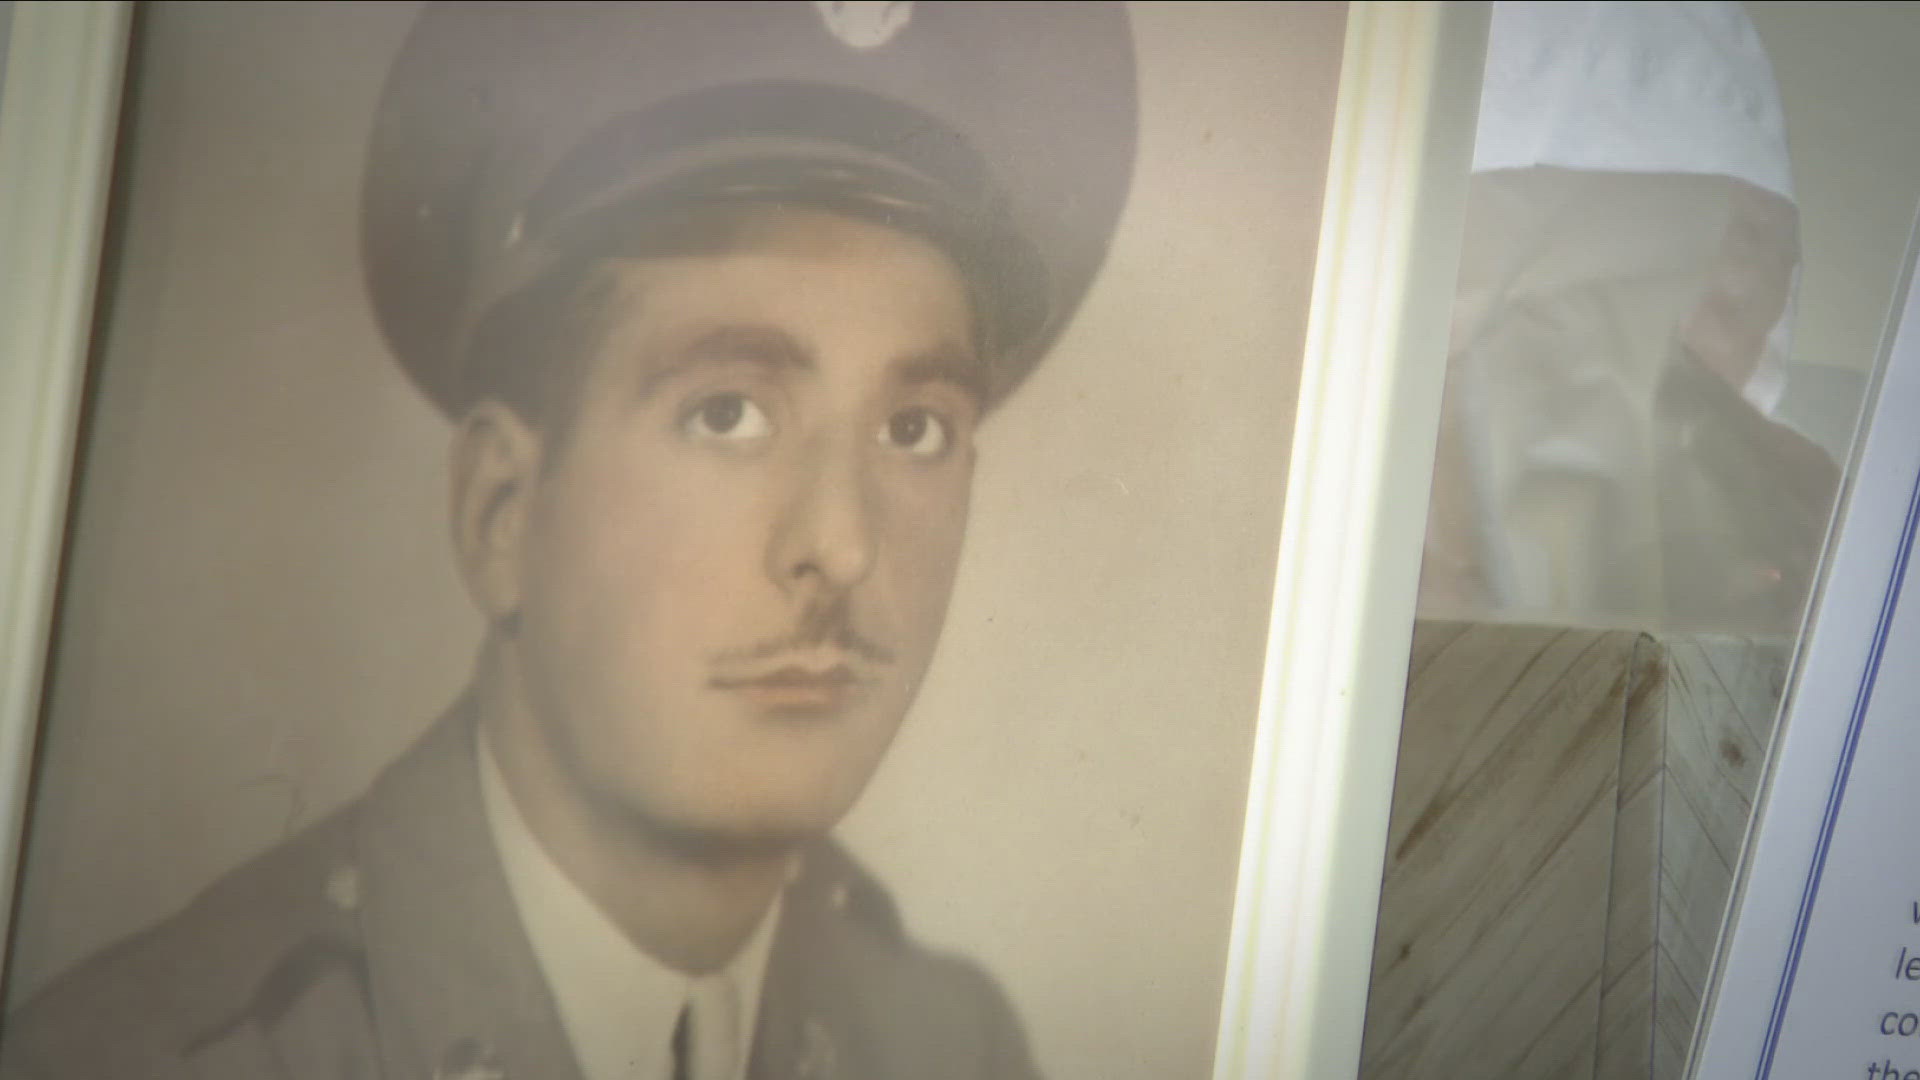 PFC Bartholomew Loschiavo had been buried in an unmarked grave at a military  cemetery in Luxembourg since 1944, but his journey home to Buffalo began in April.